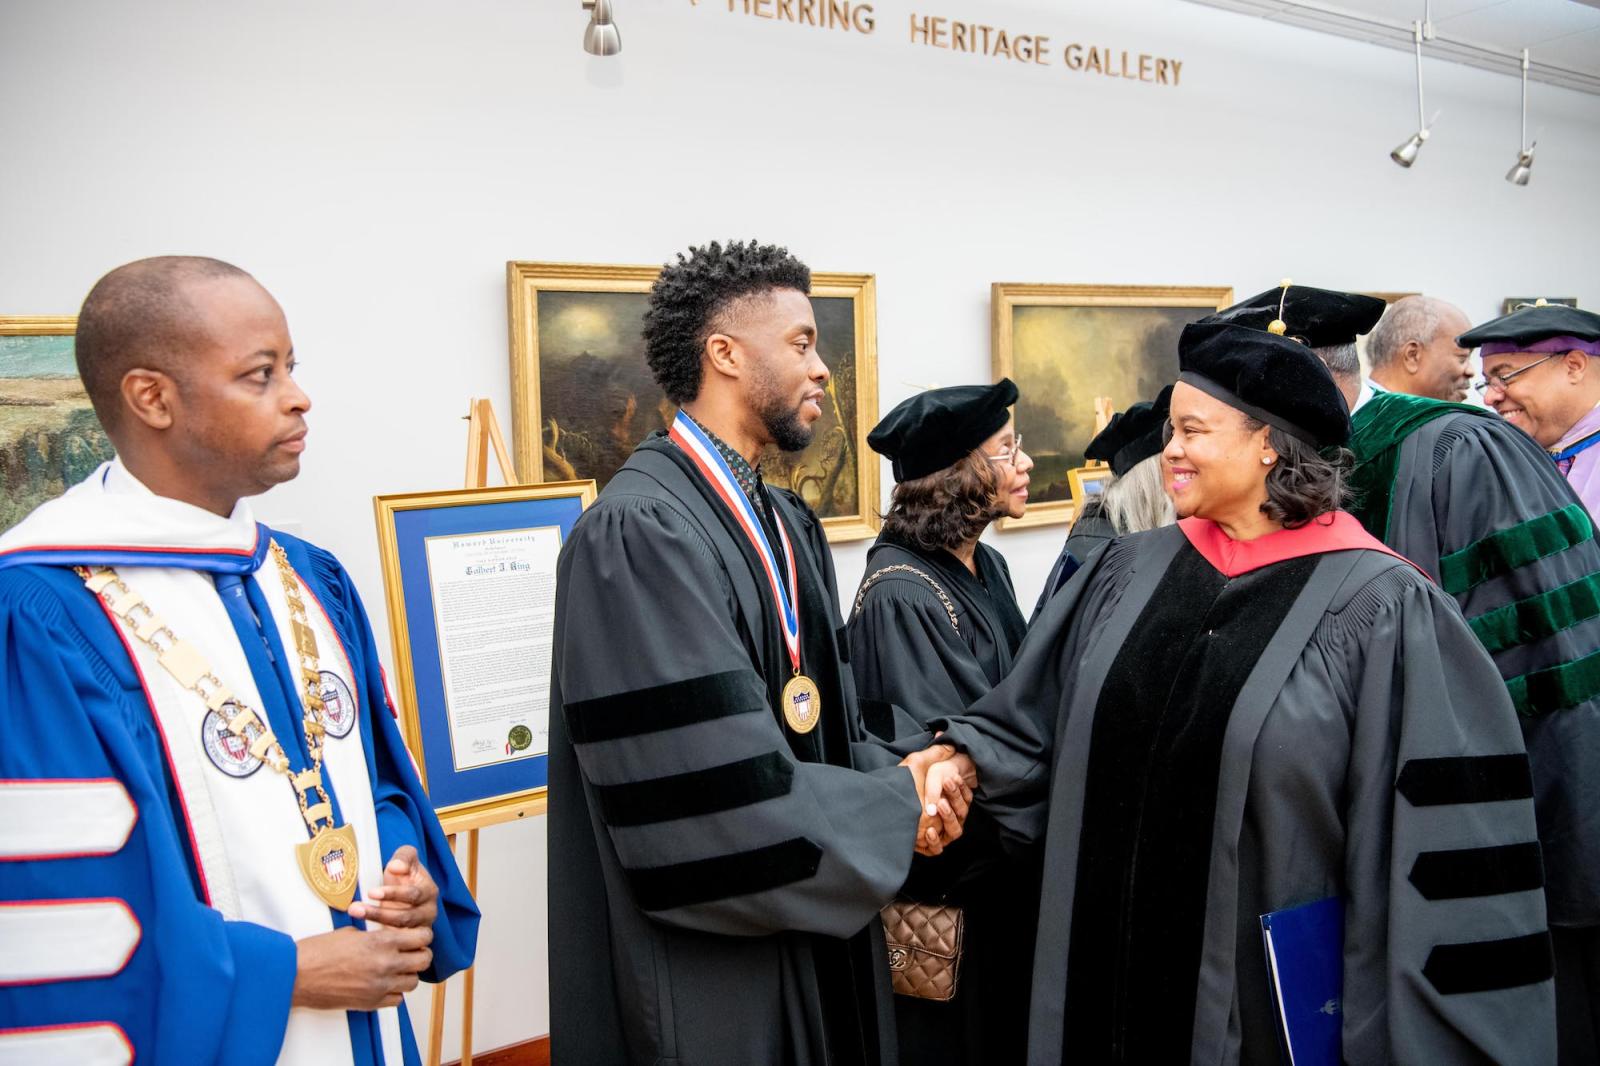 Dean Holley and Chadwick Boseman and Dr. Frederick